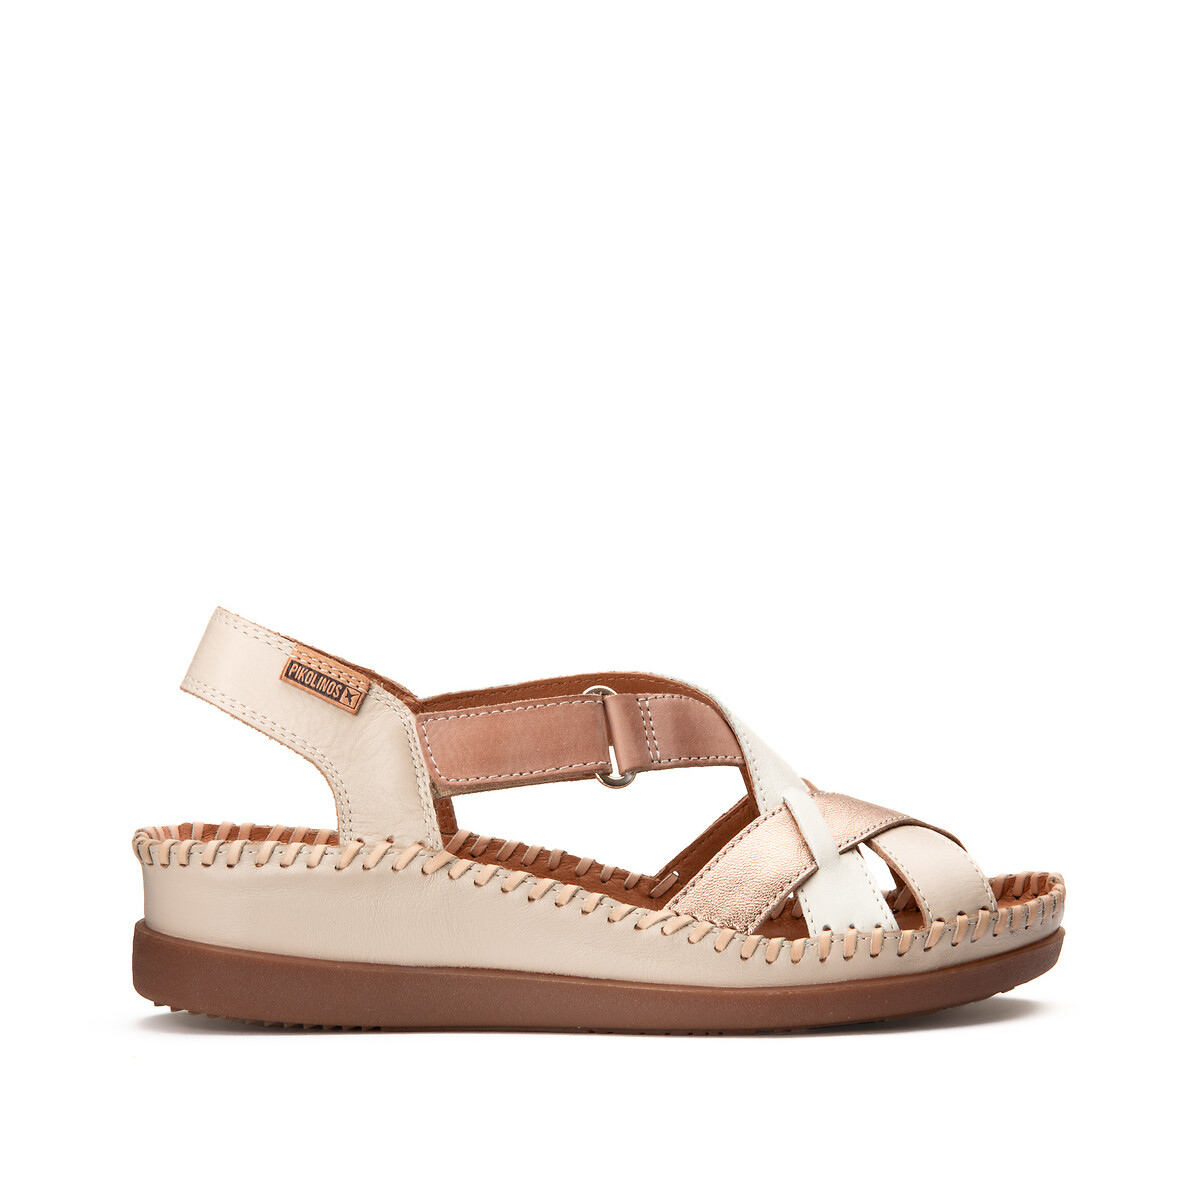 Image of Cadaques Leather Wedge Sandals